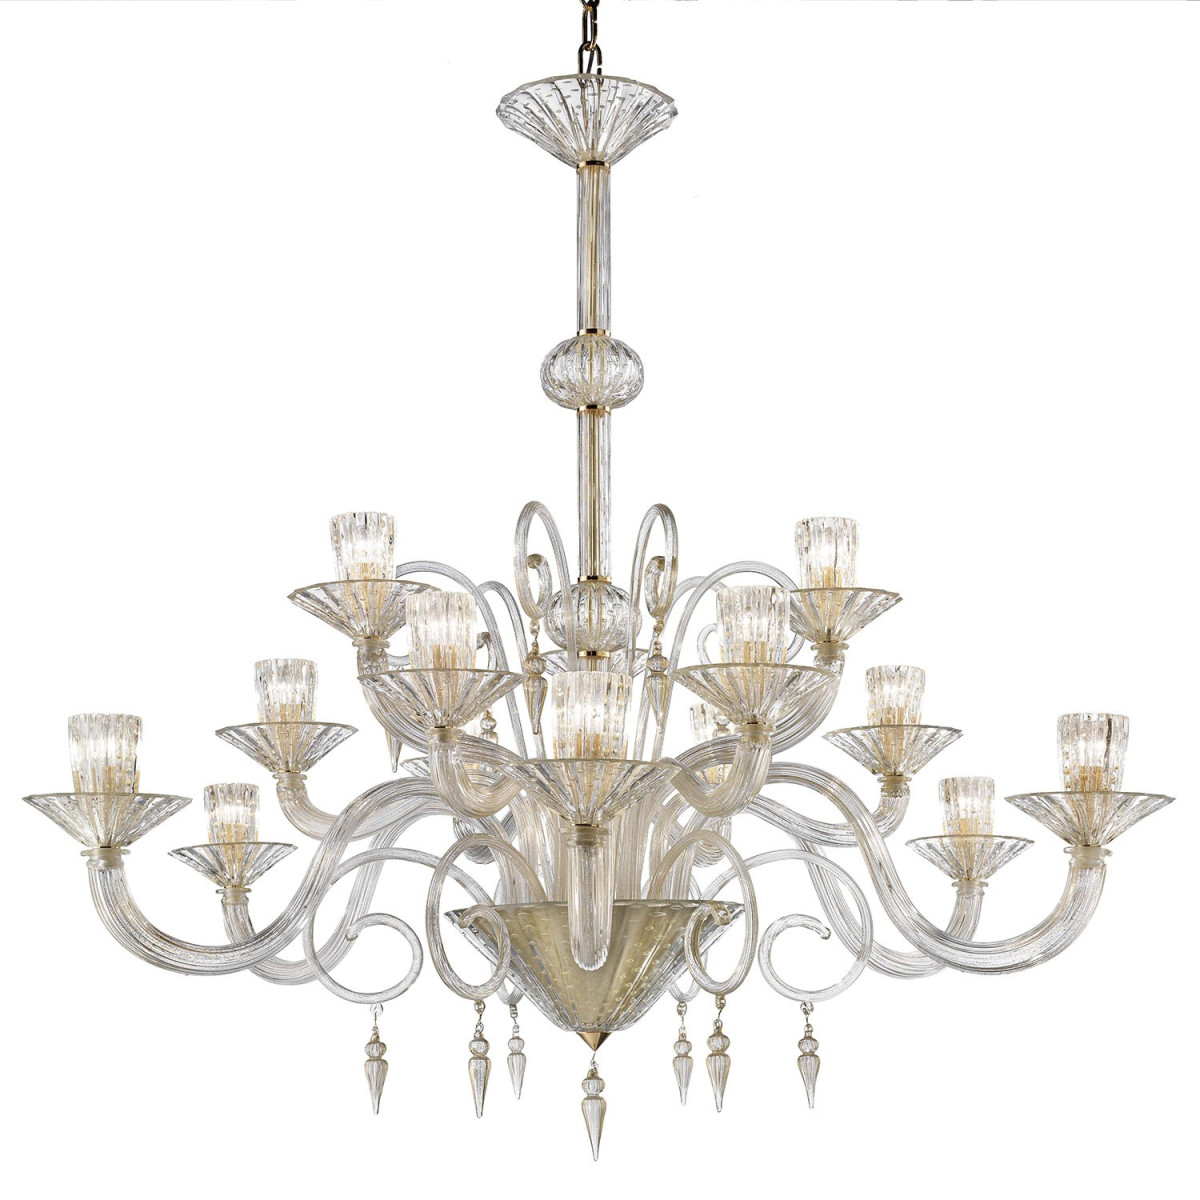 "Dioniso" Murano glass chandelier - 15 lights - all gold